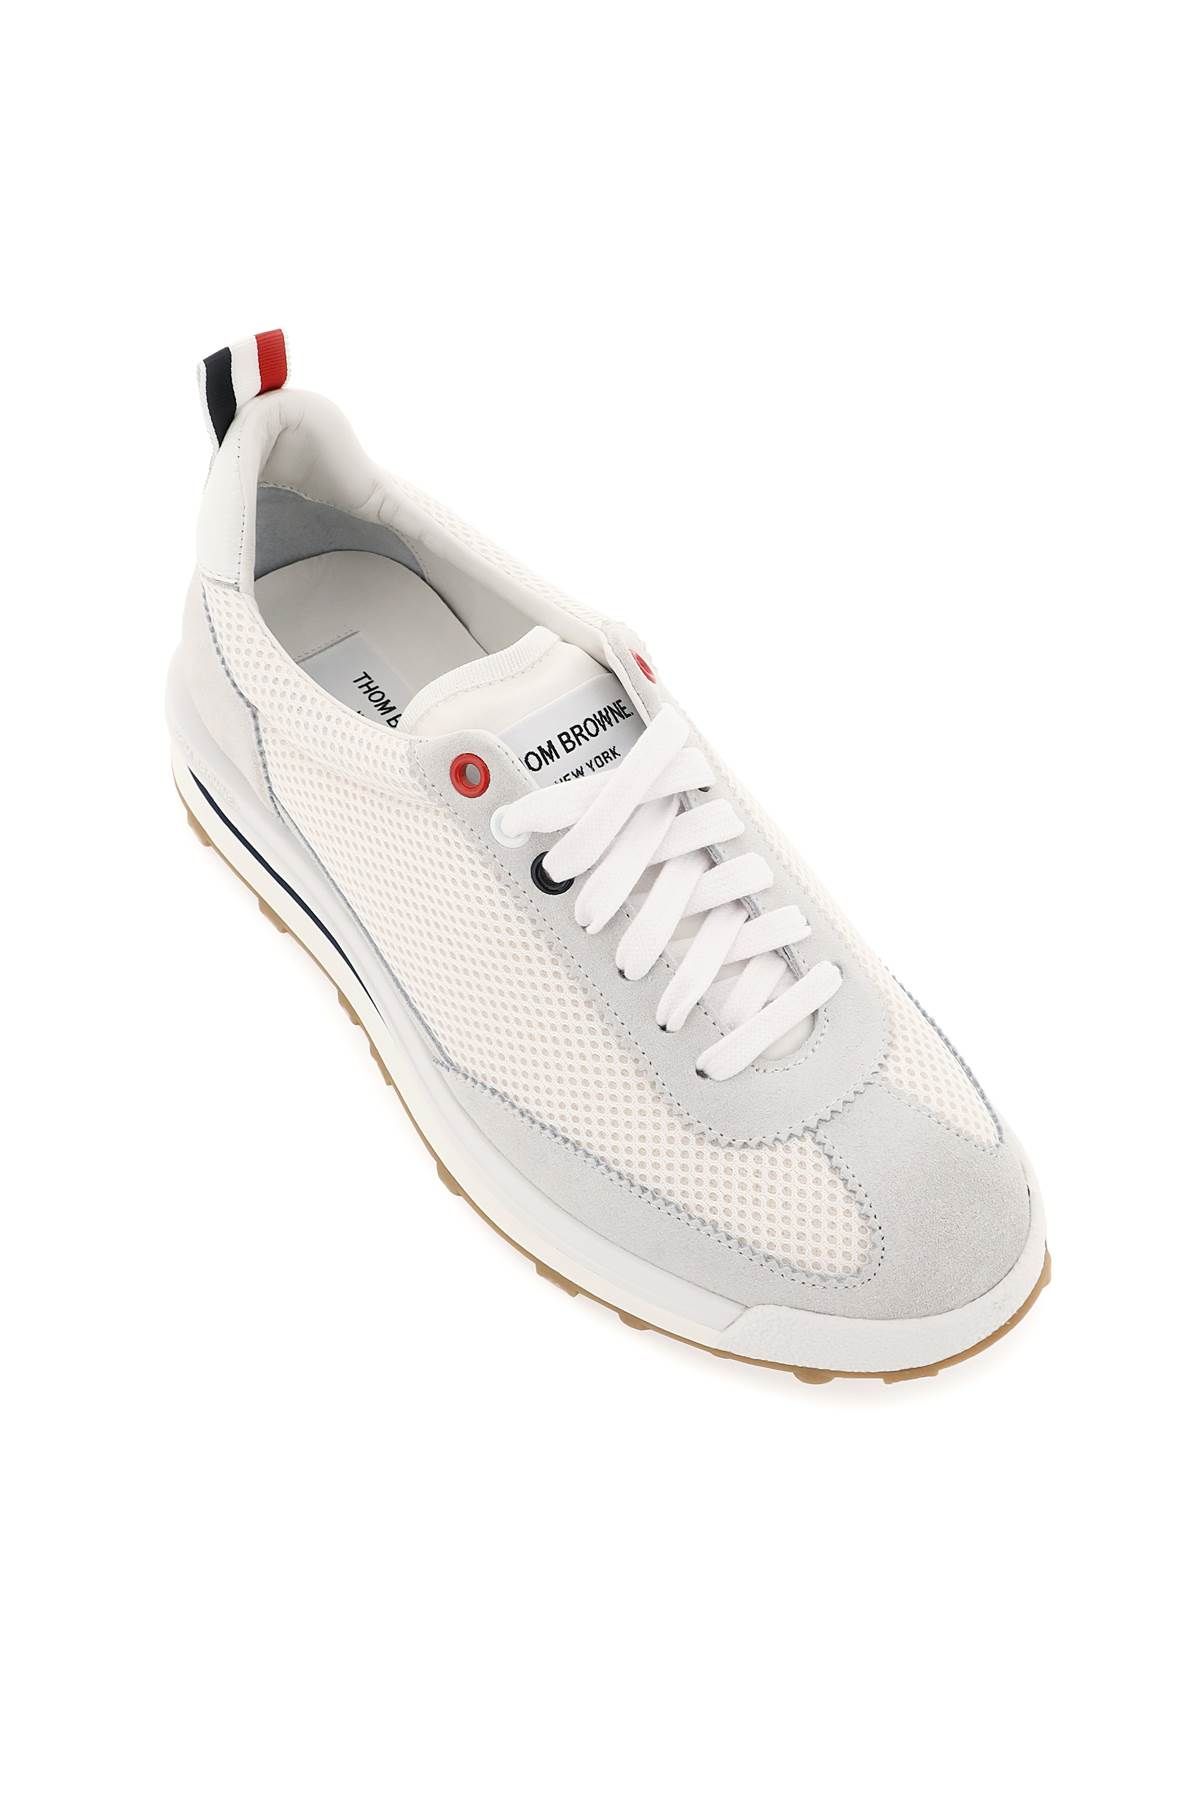 Shop Thom Browne Tech Runner Sneakers In White,grey